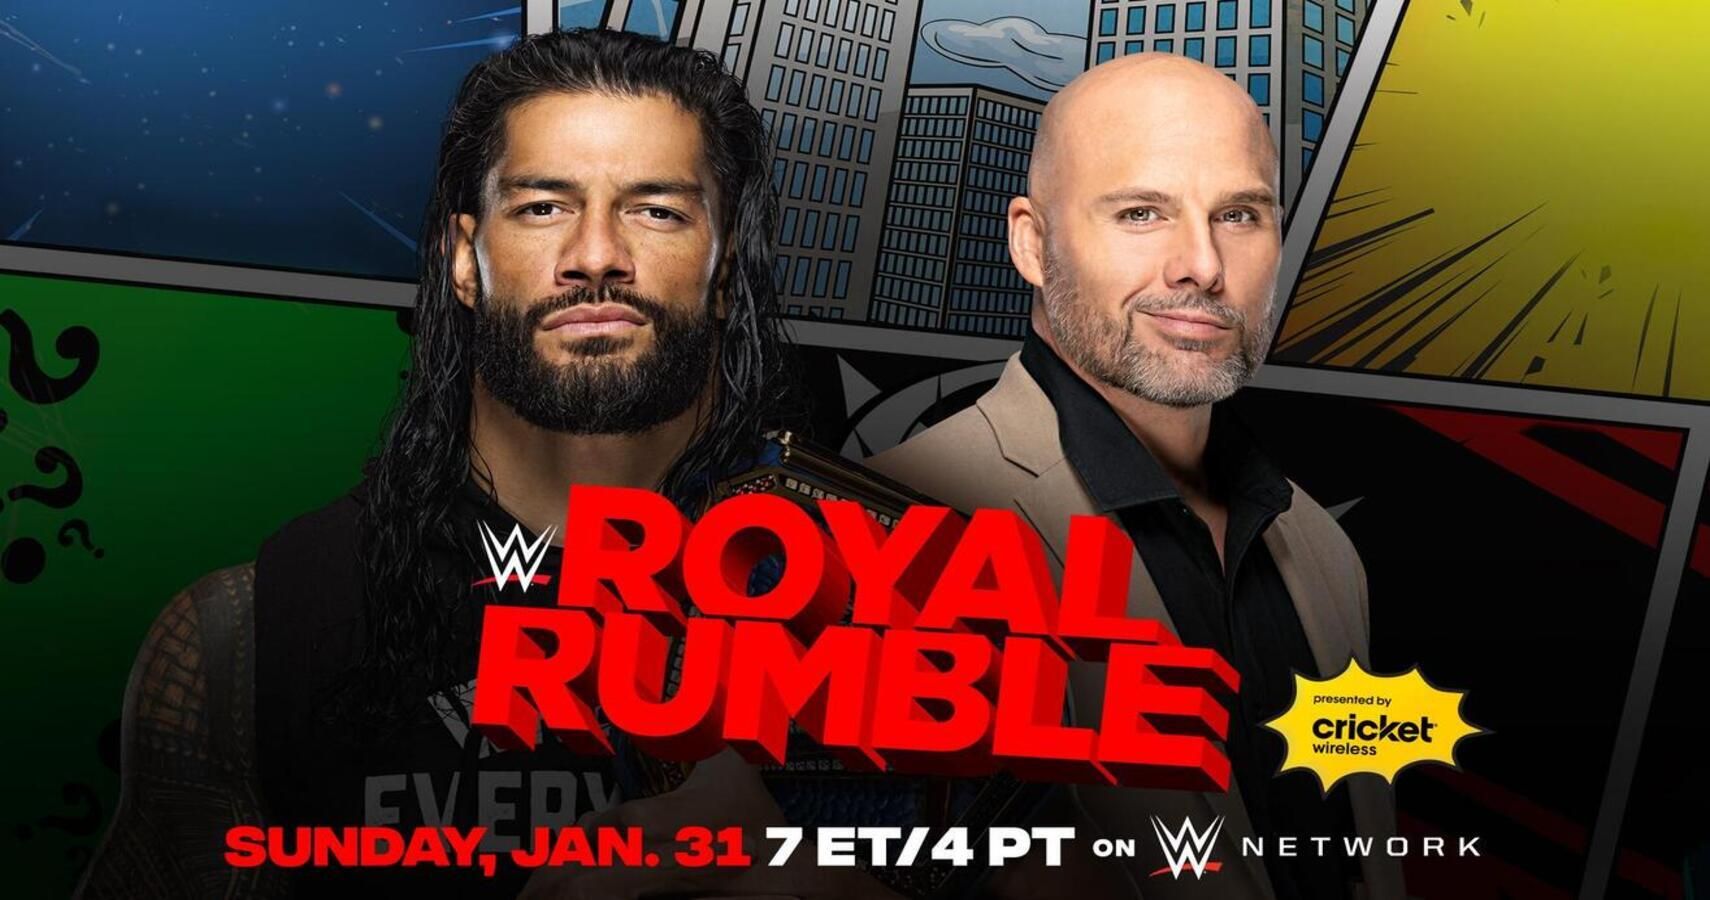 WWE May Change Roman Reigns' Royal Rumble Opponent [Rumor]